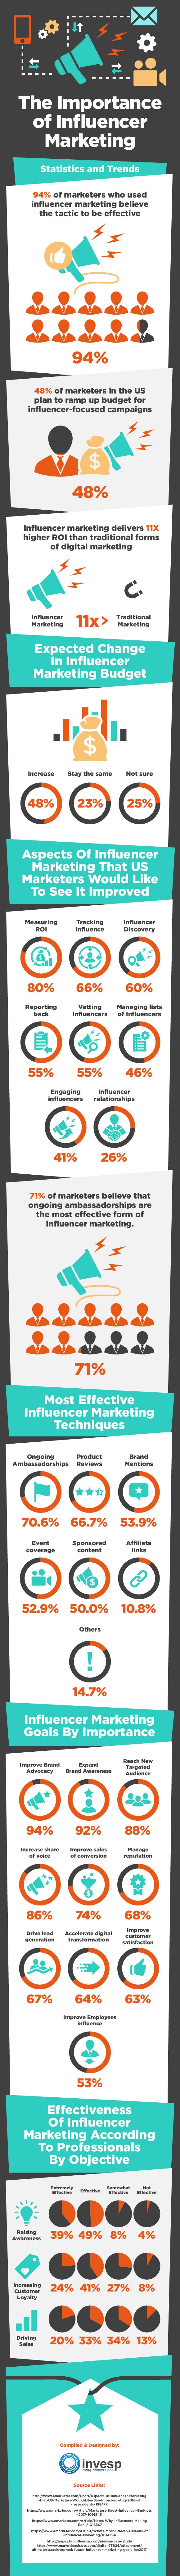 Why Influencer Marketing is Important [Infographic]